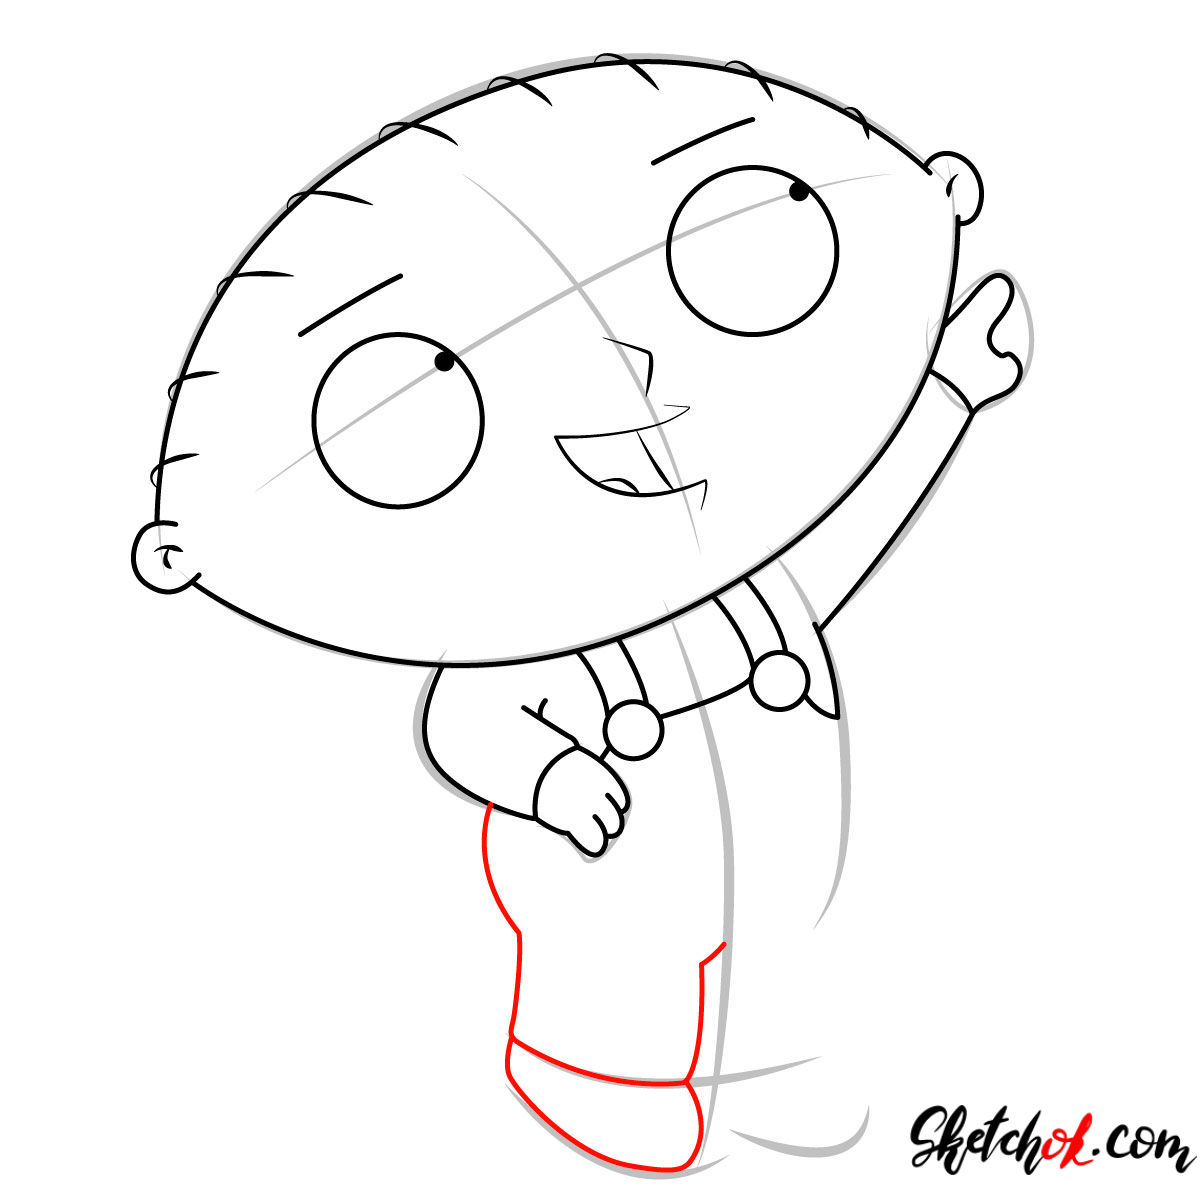 How to draw Stewie Griffin - step 07